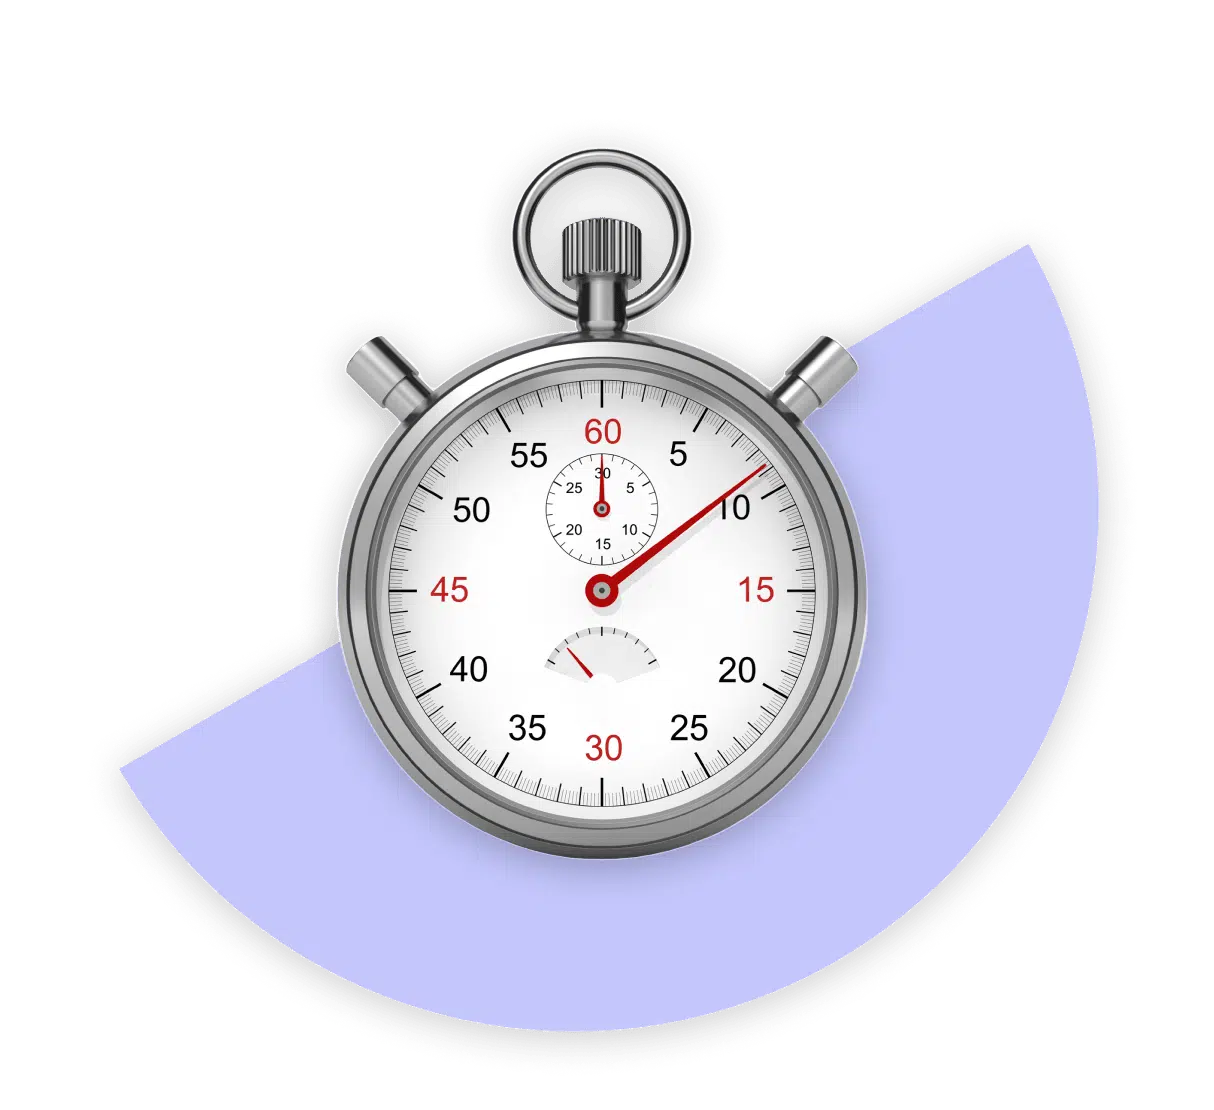 Image of a stop watch